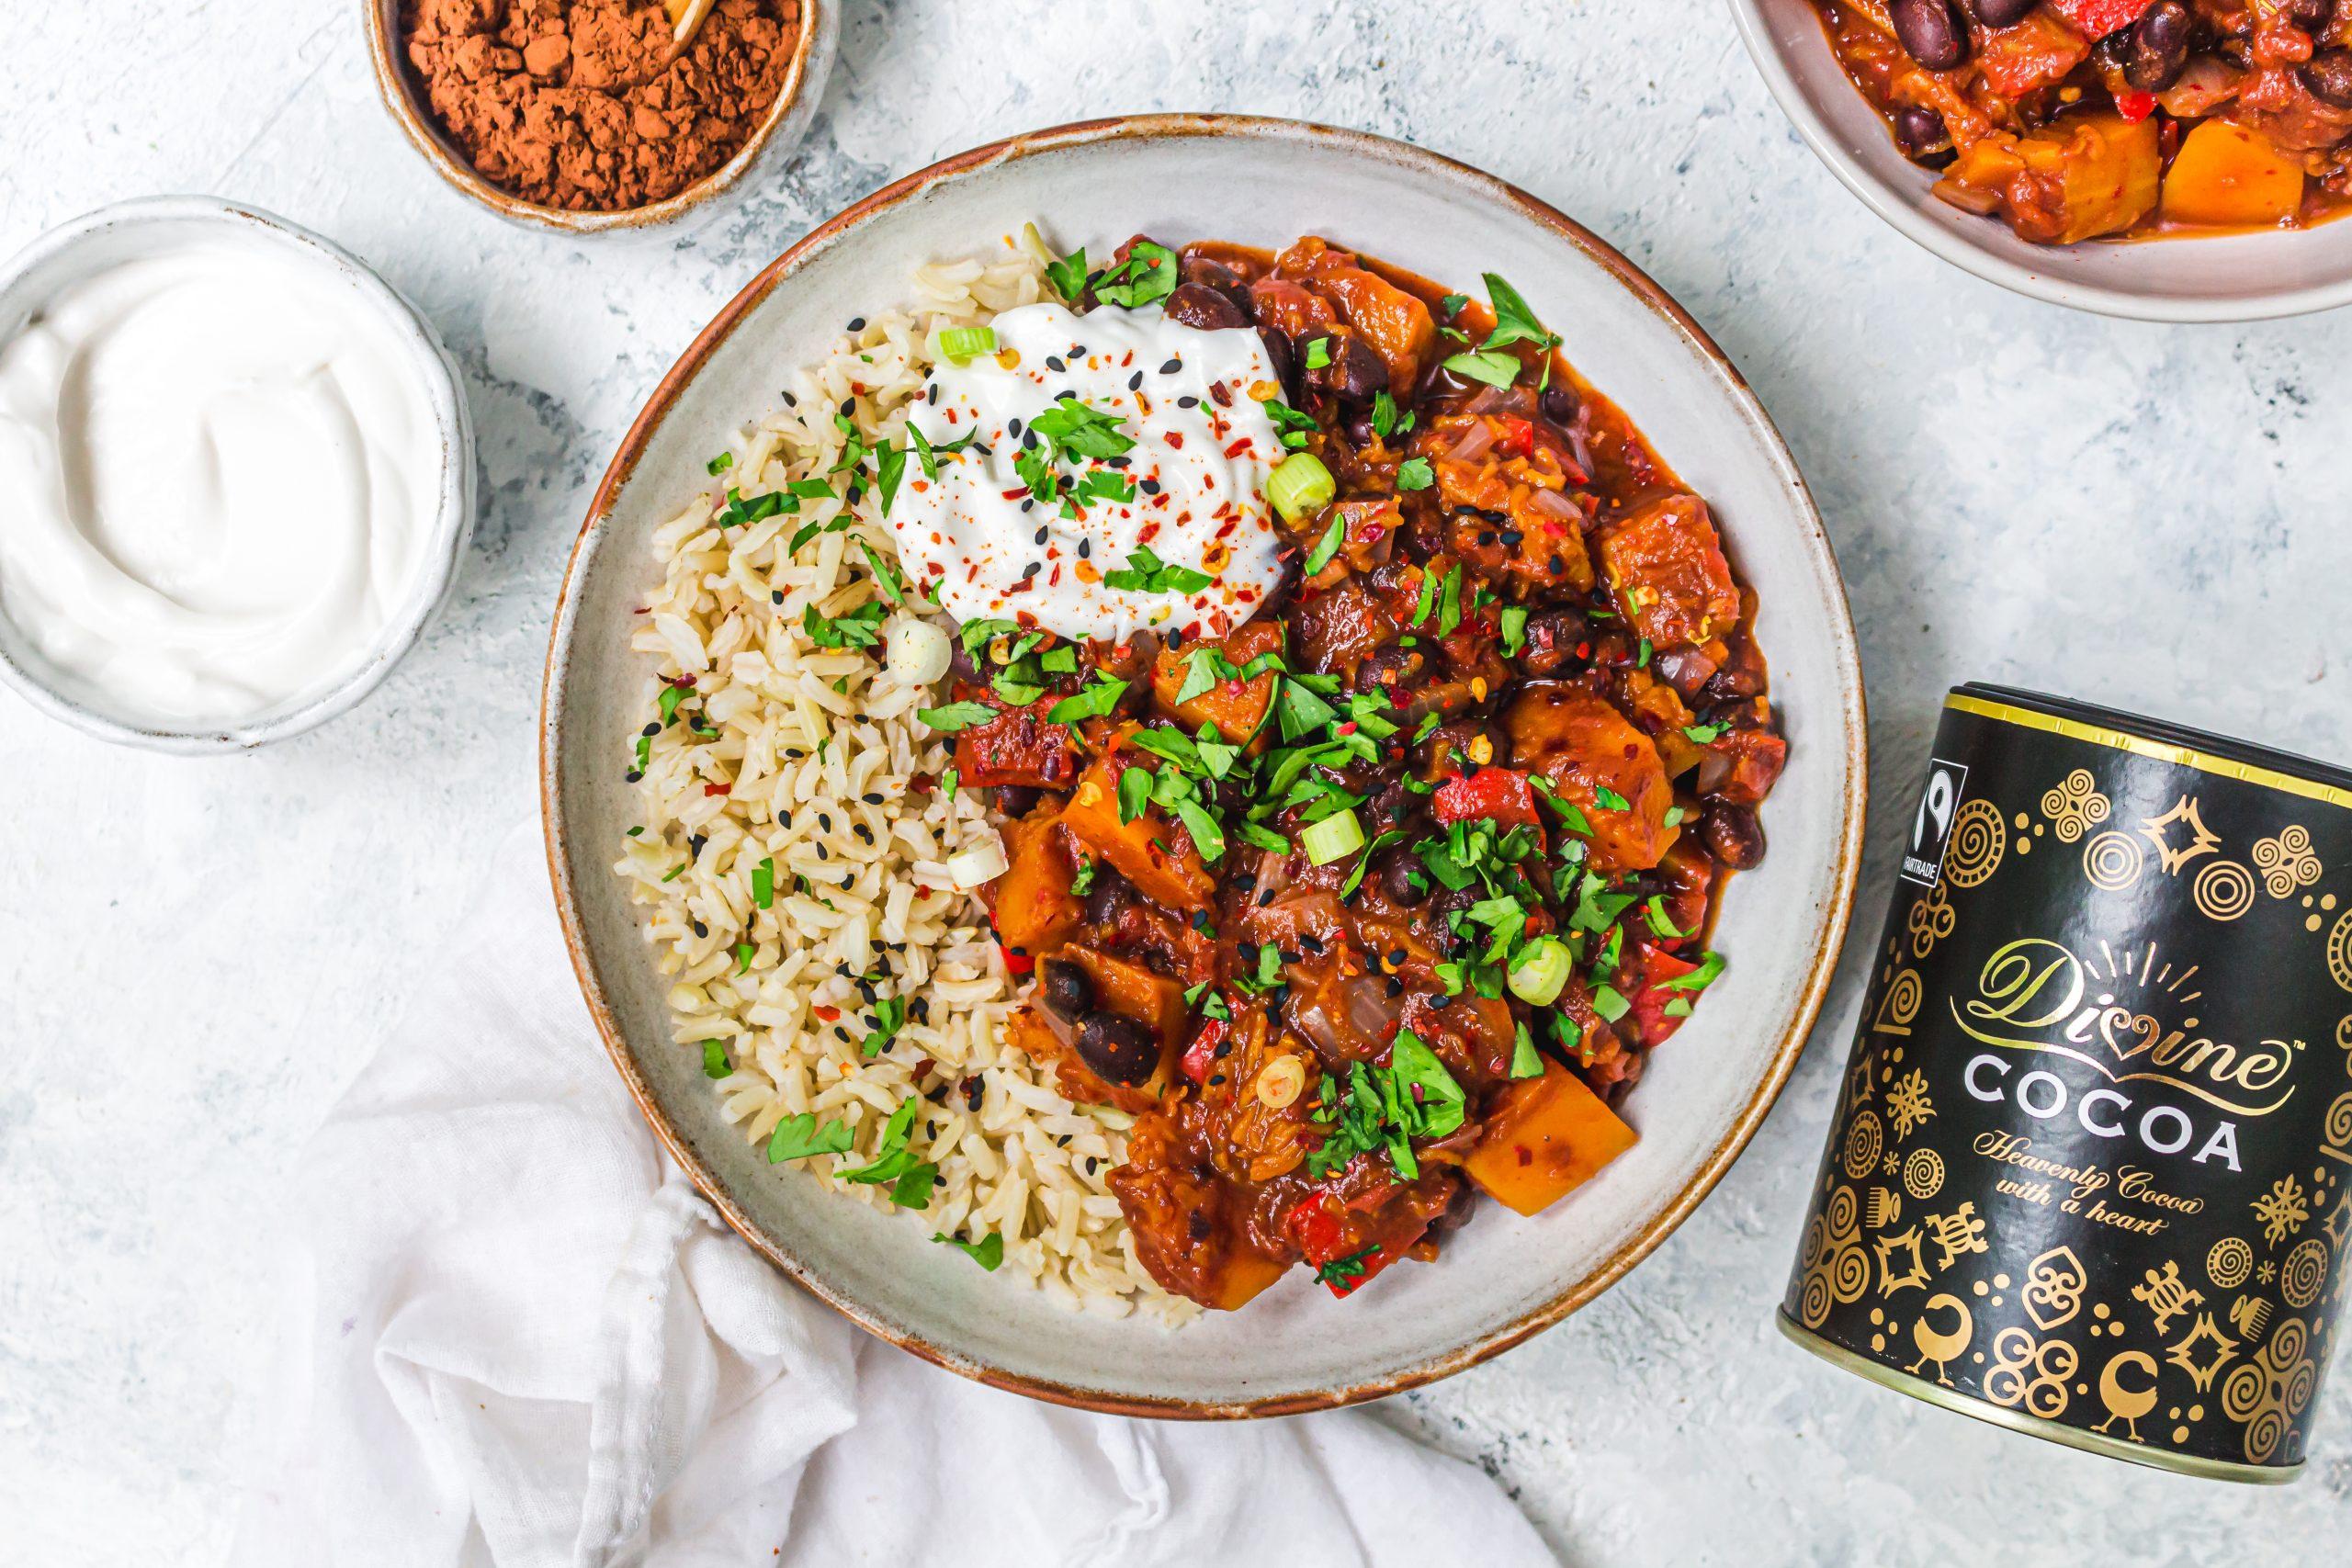 Black Bean and Squash Feijoada with Cocoa